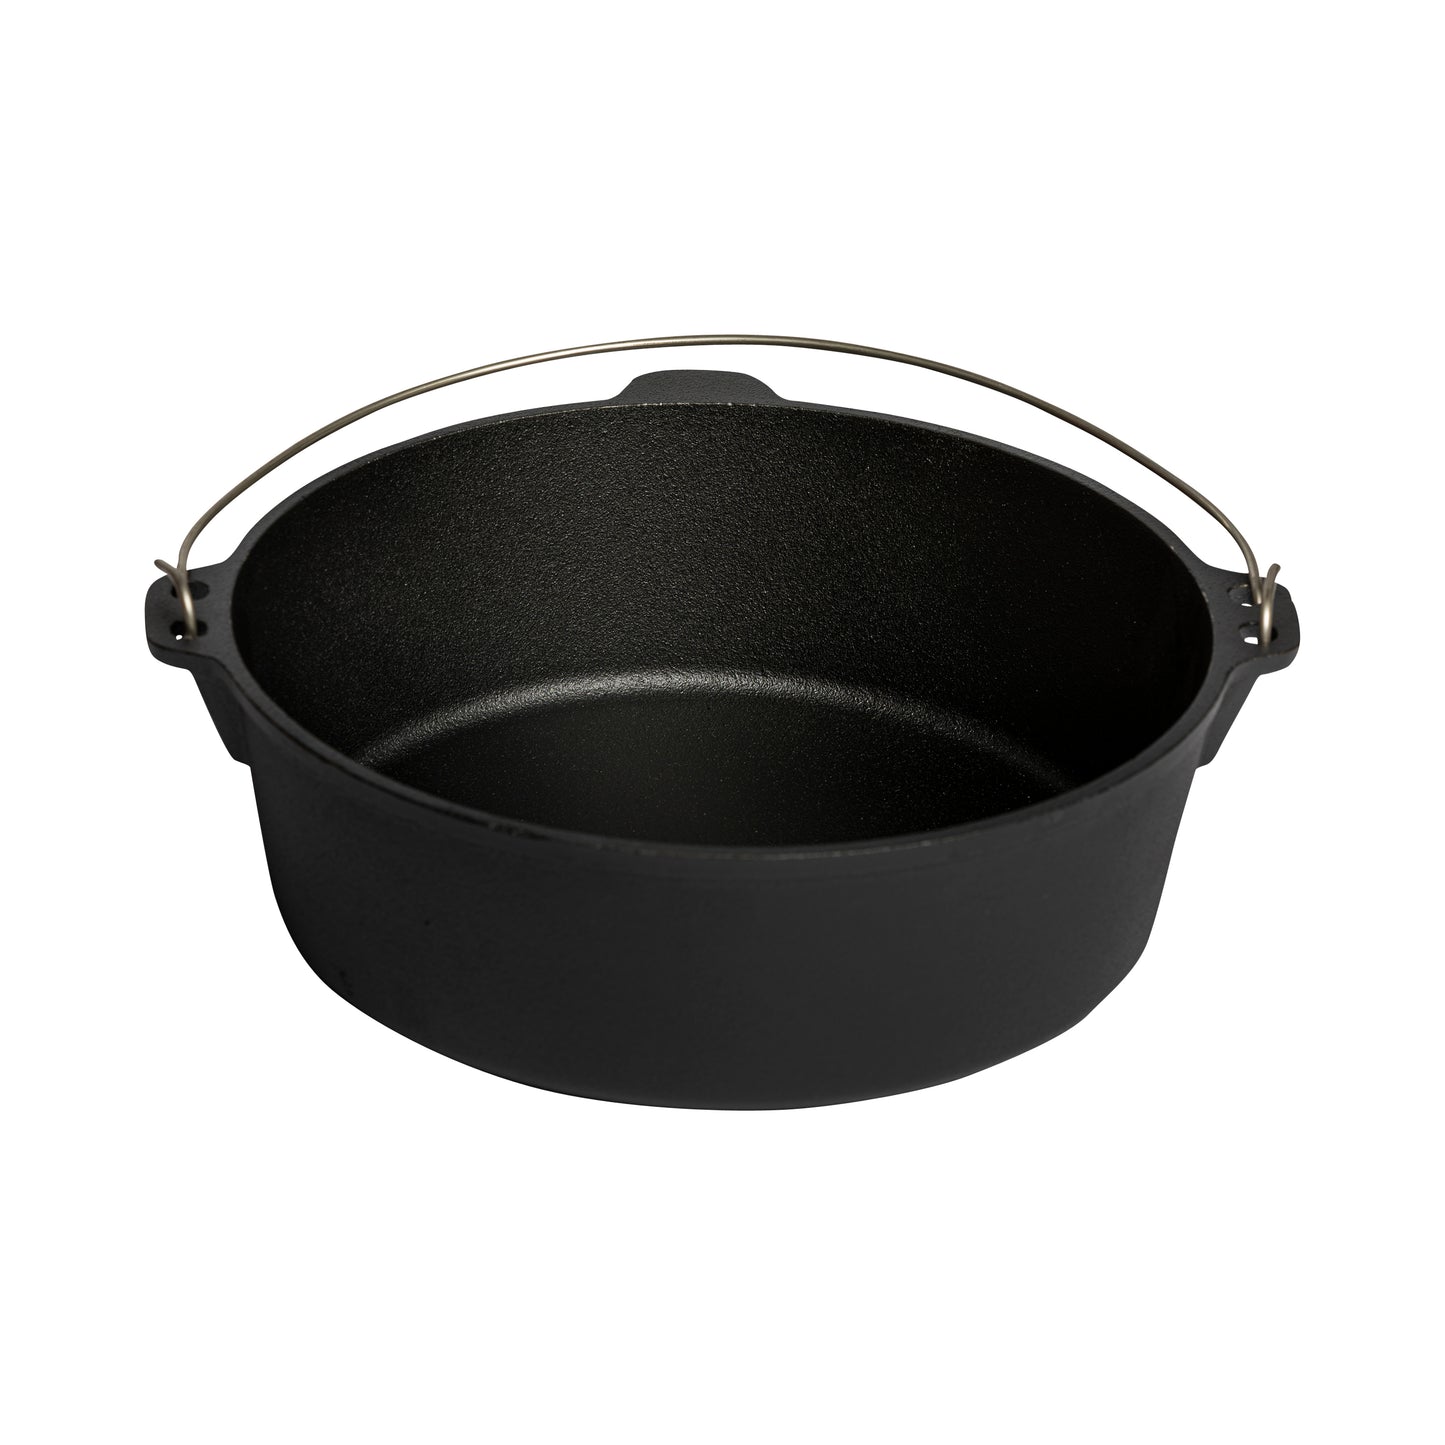 Smokin' Flavours Dutch Oven - Large